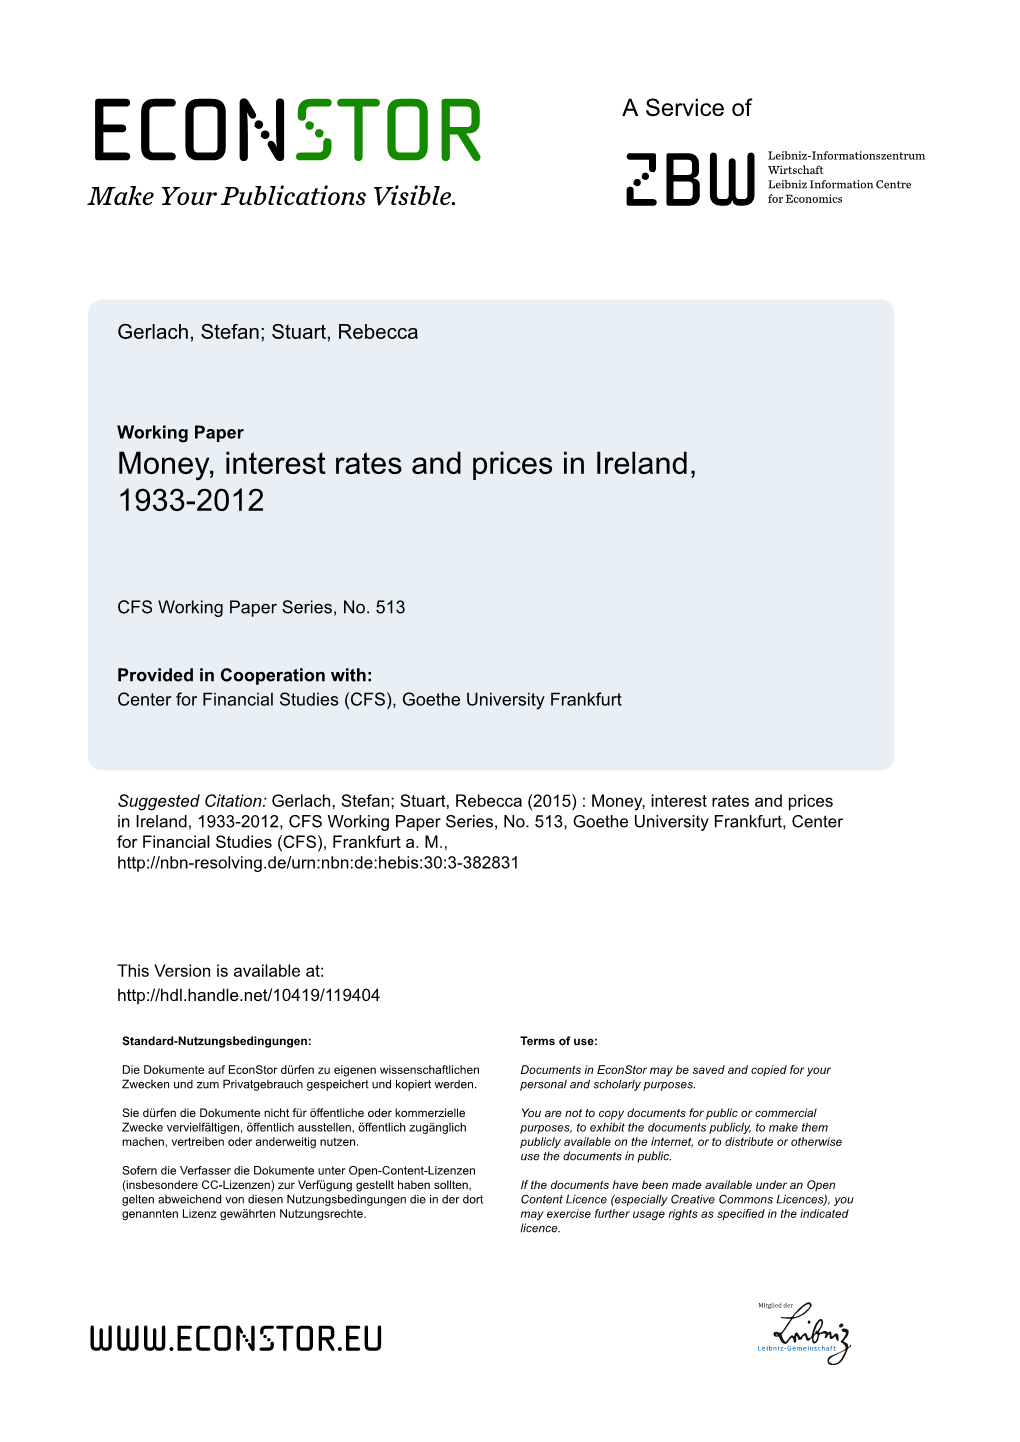 Money, Interest Rates and Prices in Ireland, 1933-2012